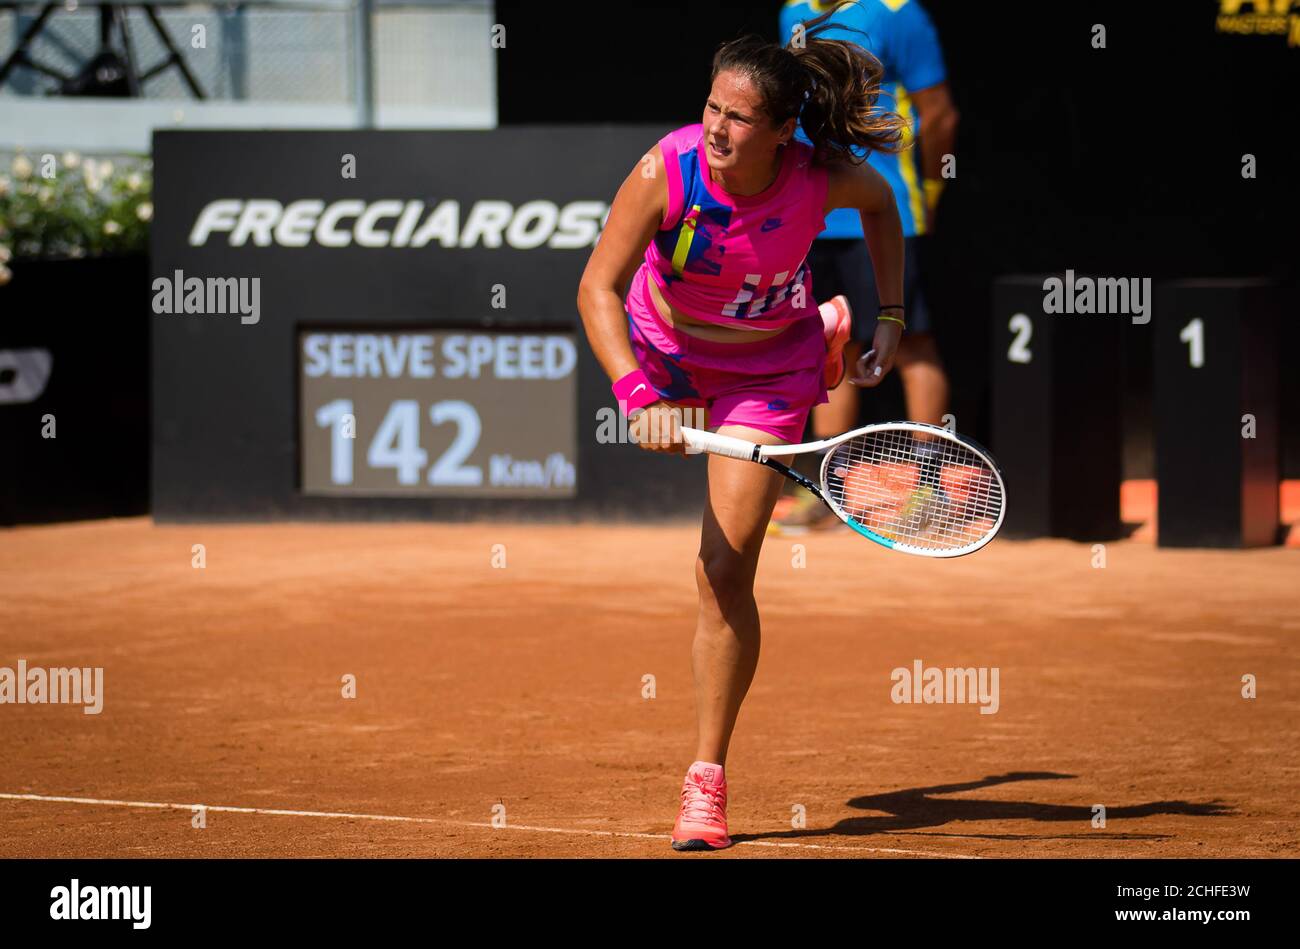 Rome, Italy. 14th September, 2020. Daria Kasatkina of Russia in action  during the final qualifying round at the 2020 Internazionali BNL d'Italia  WTA Premier 5 tennis tournament on September 13, 2020 at